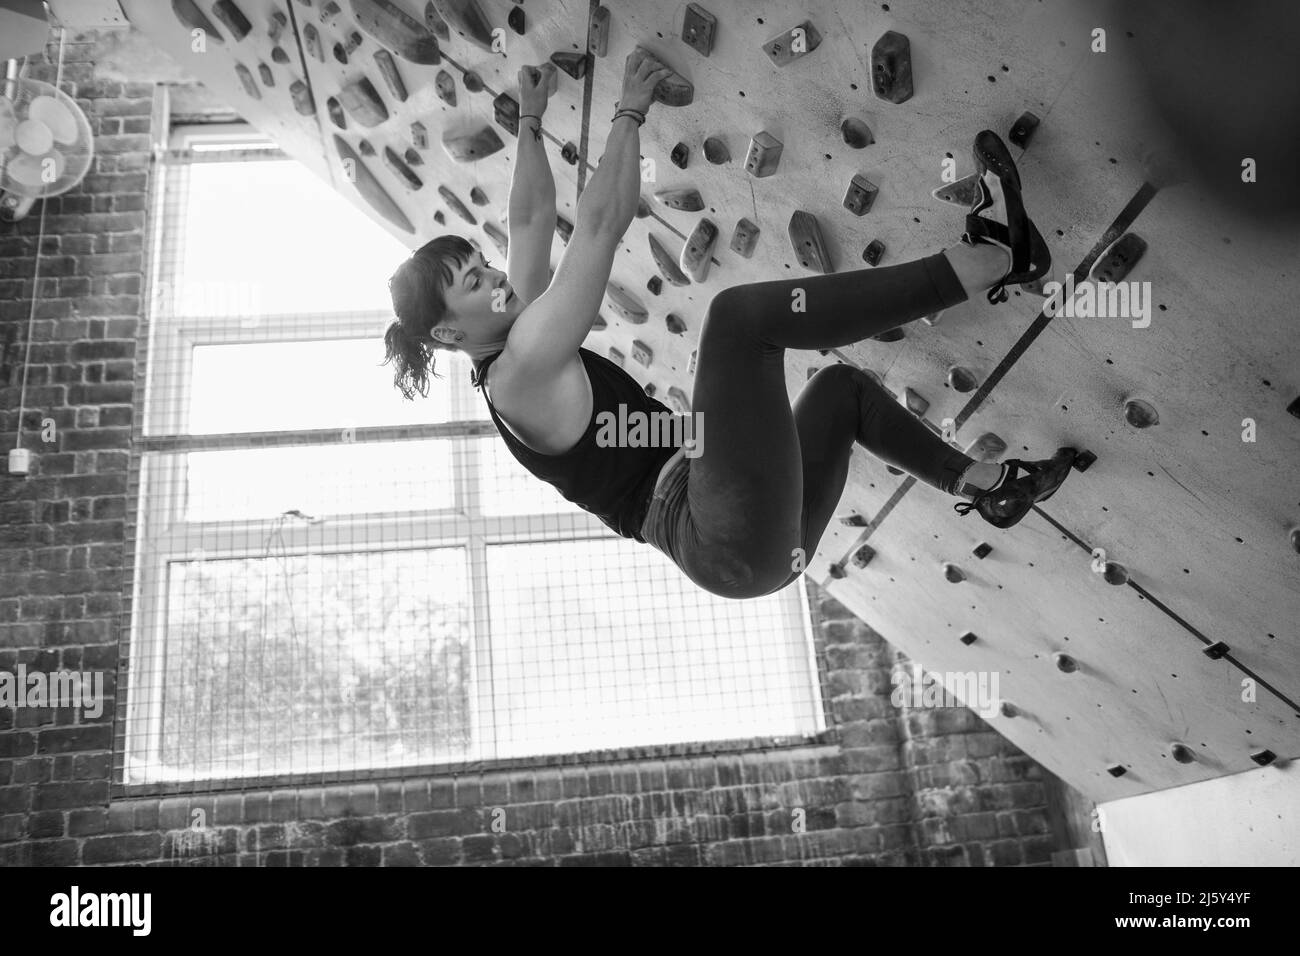 Young woman hanging from climbing wall Stock Photo